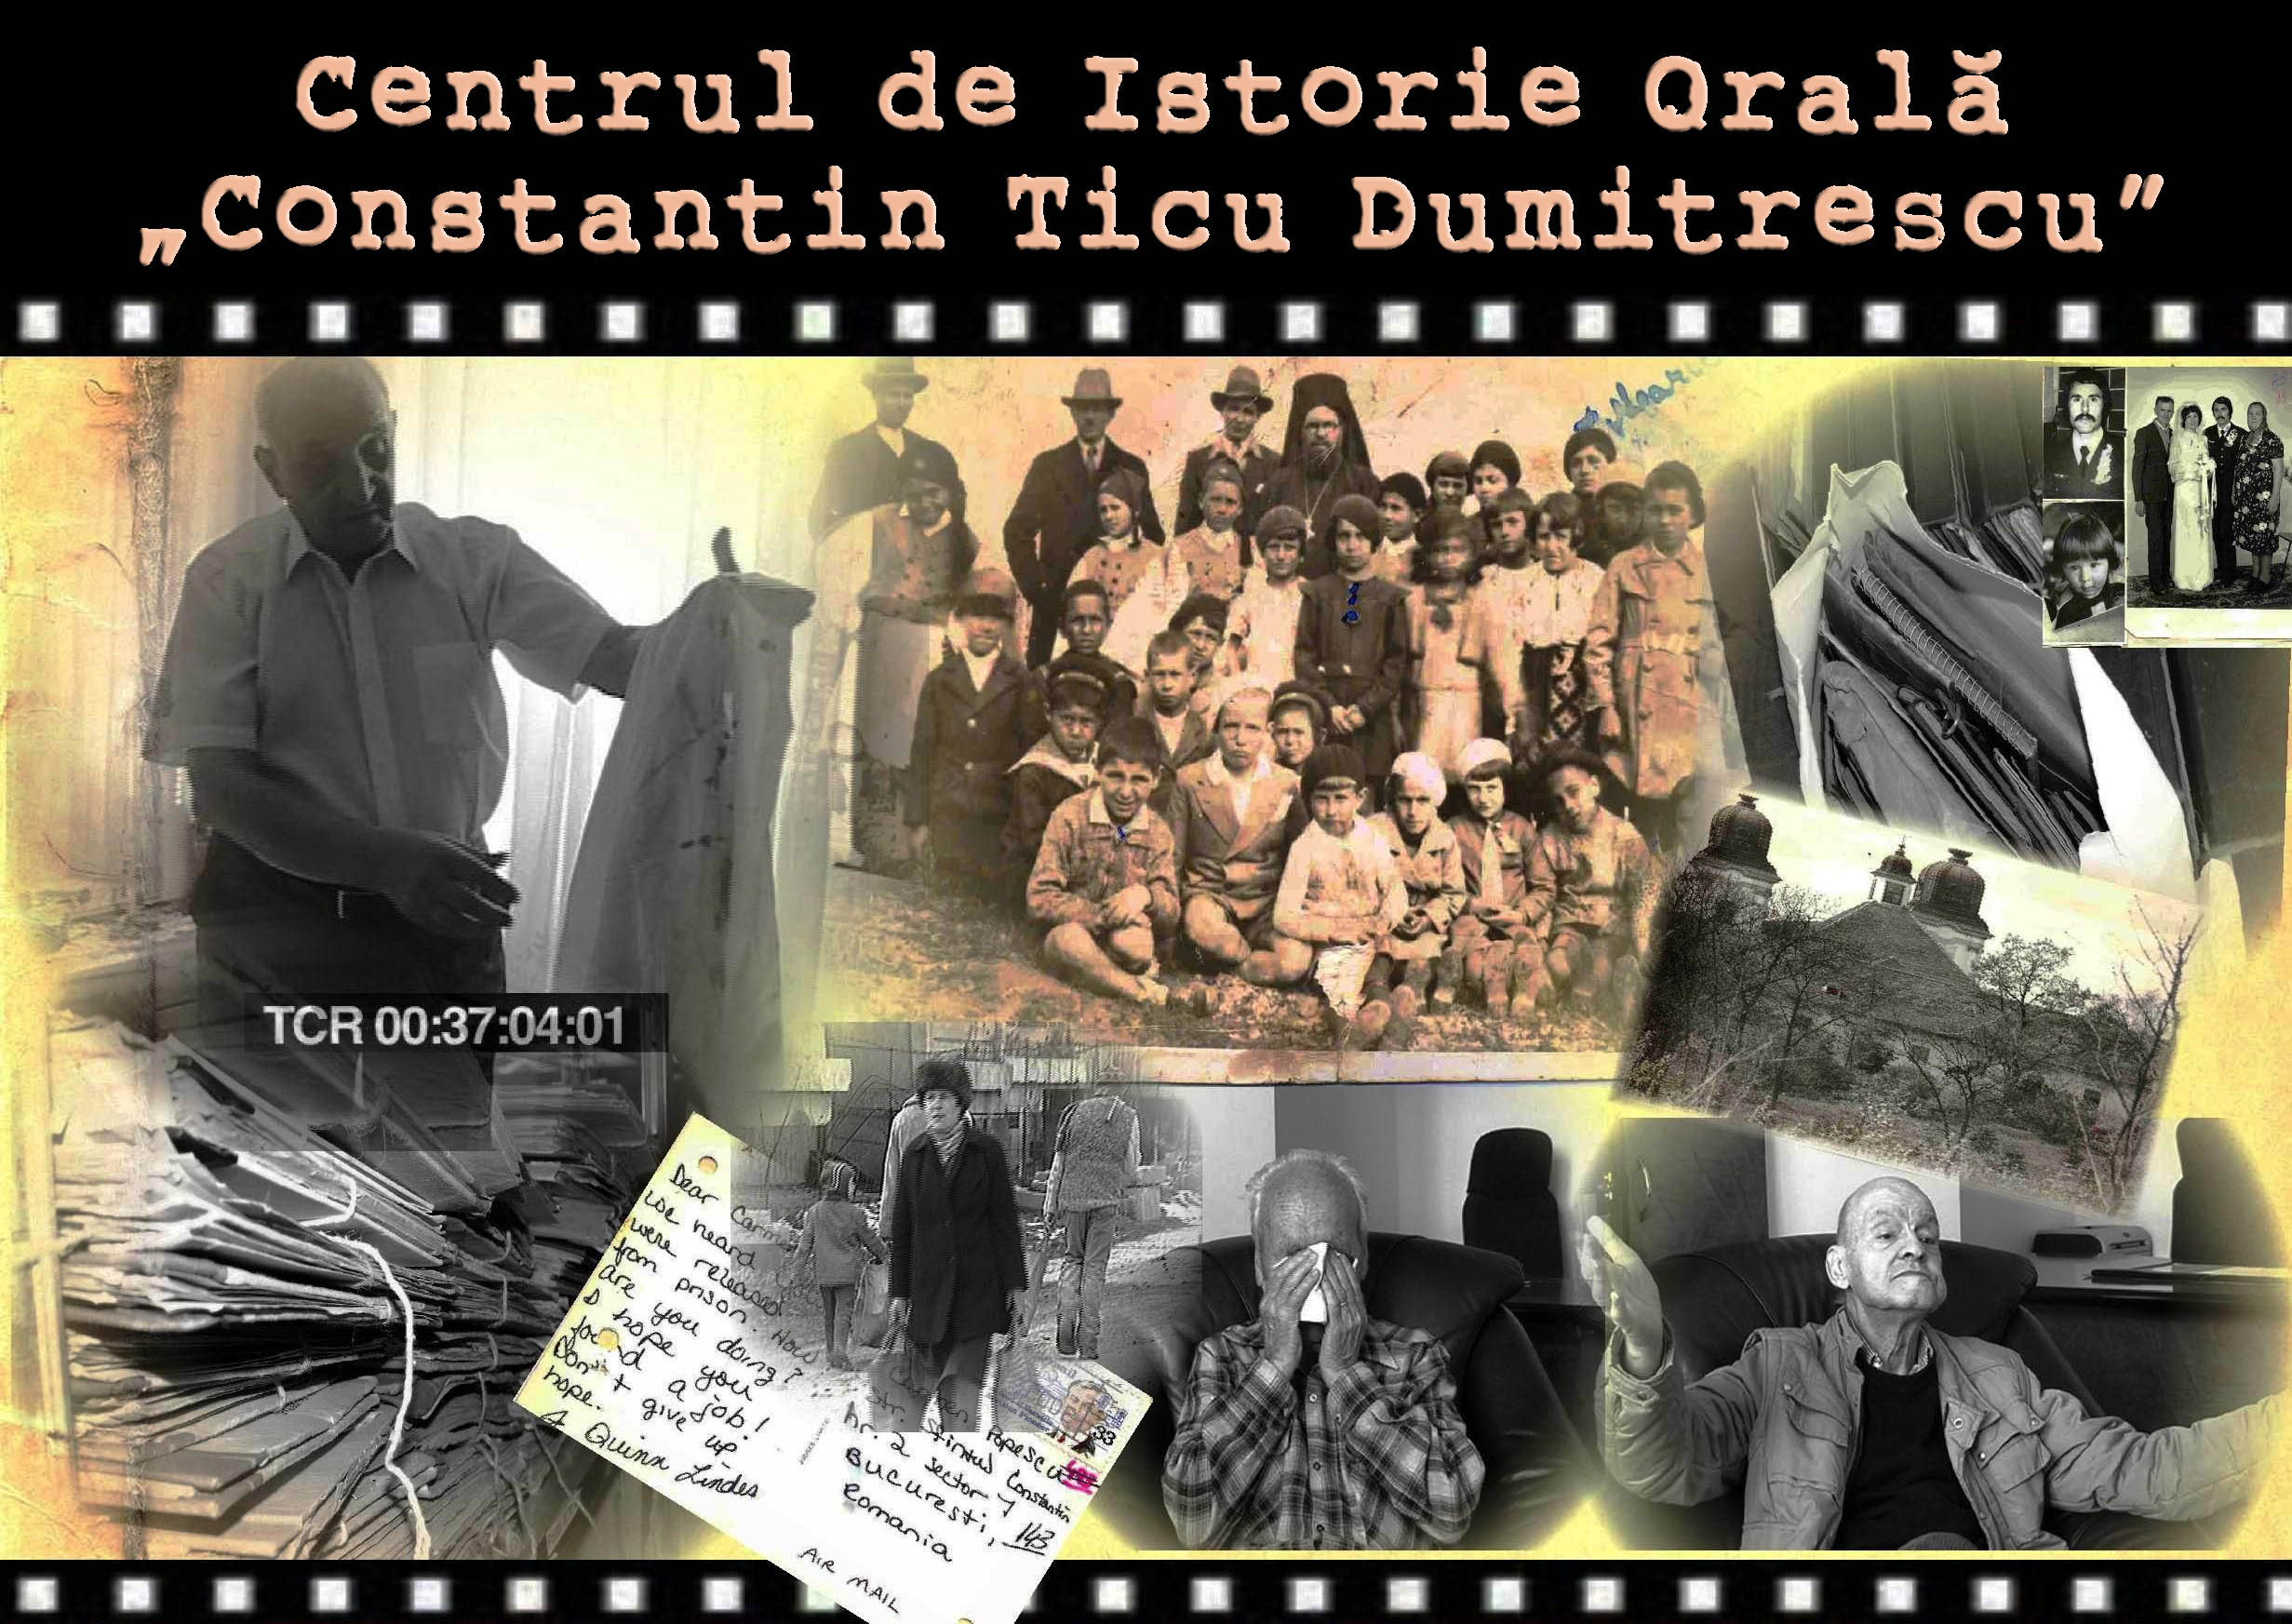 Official poster of the Oral History Centre at CNSAS